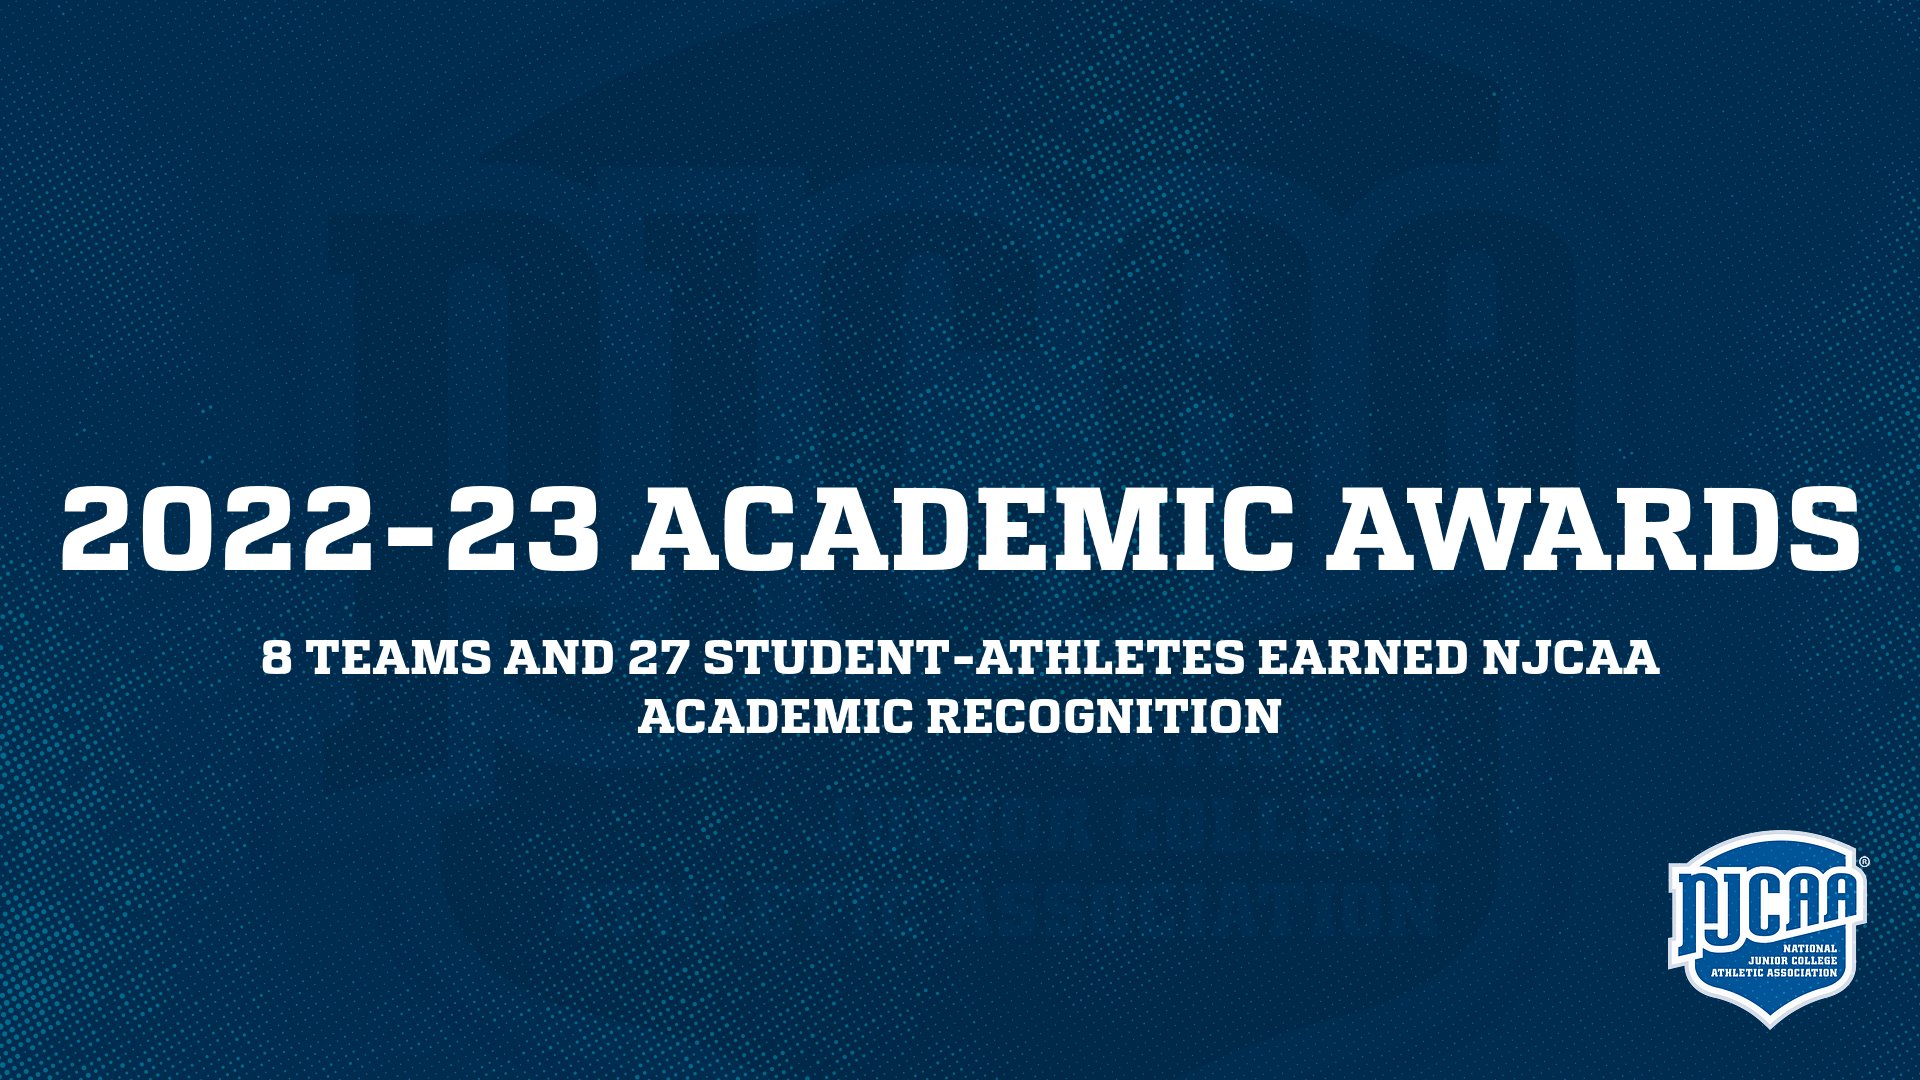 8 teams and 27 Student-Athletes Earned NJCAA Academic Recognition